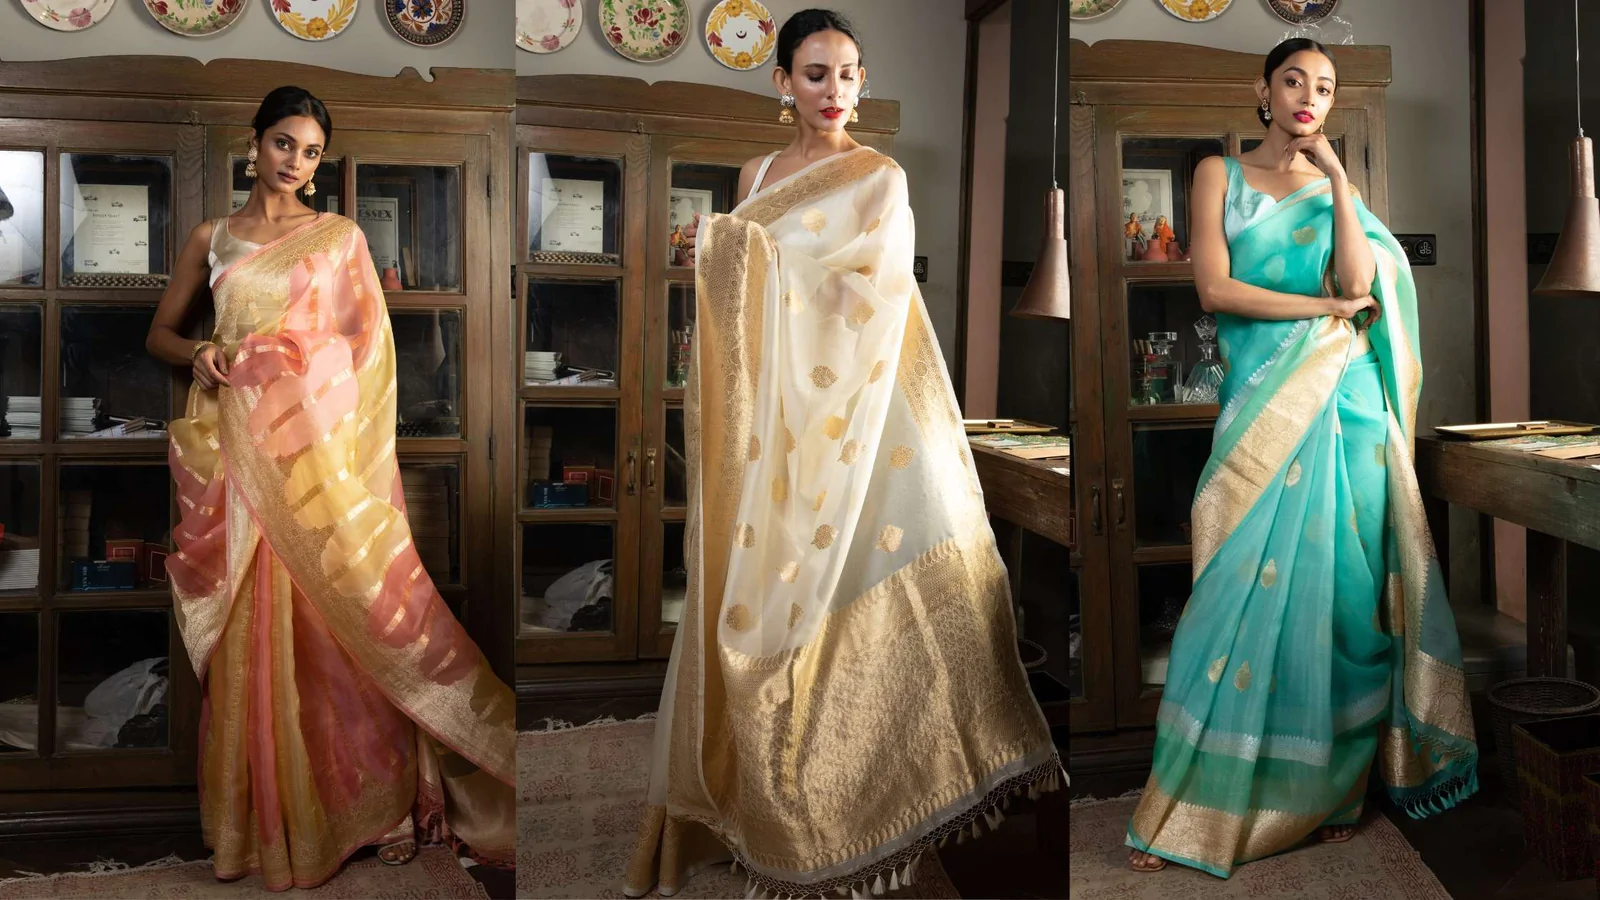 Sarees Made Of Pure Banarasi Silk: Always Been A Classic Choice For Weddings And Other Formal Event